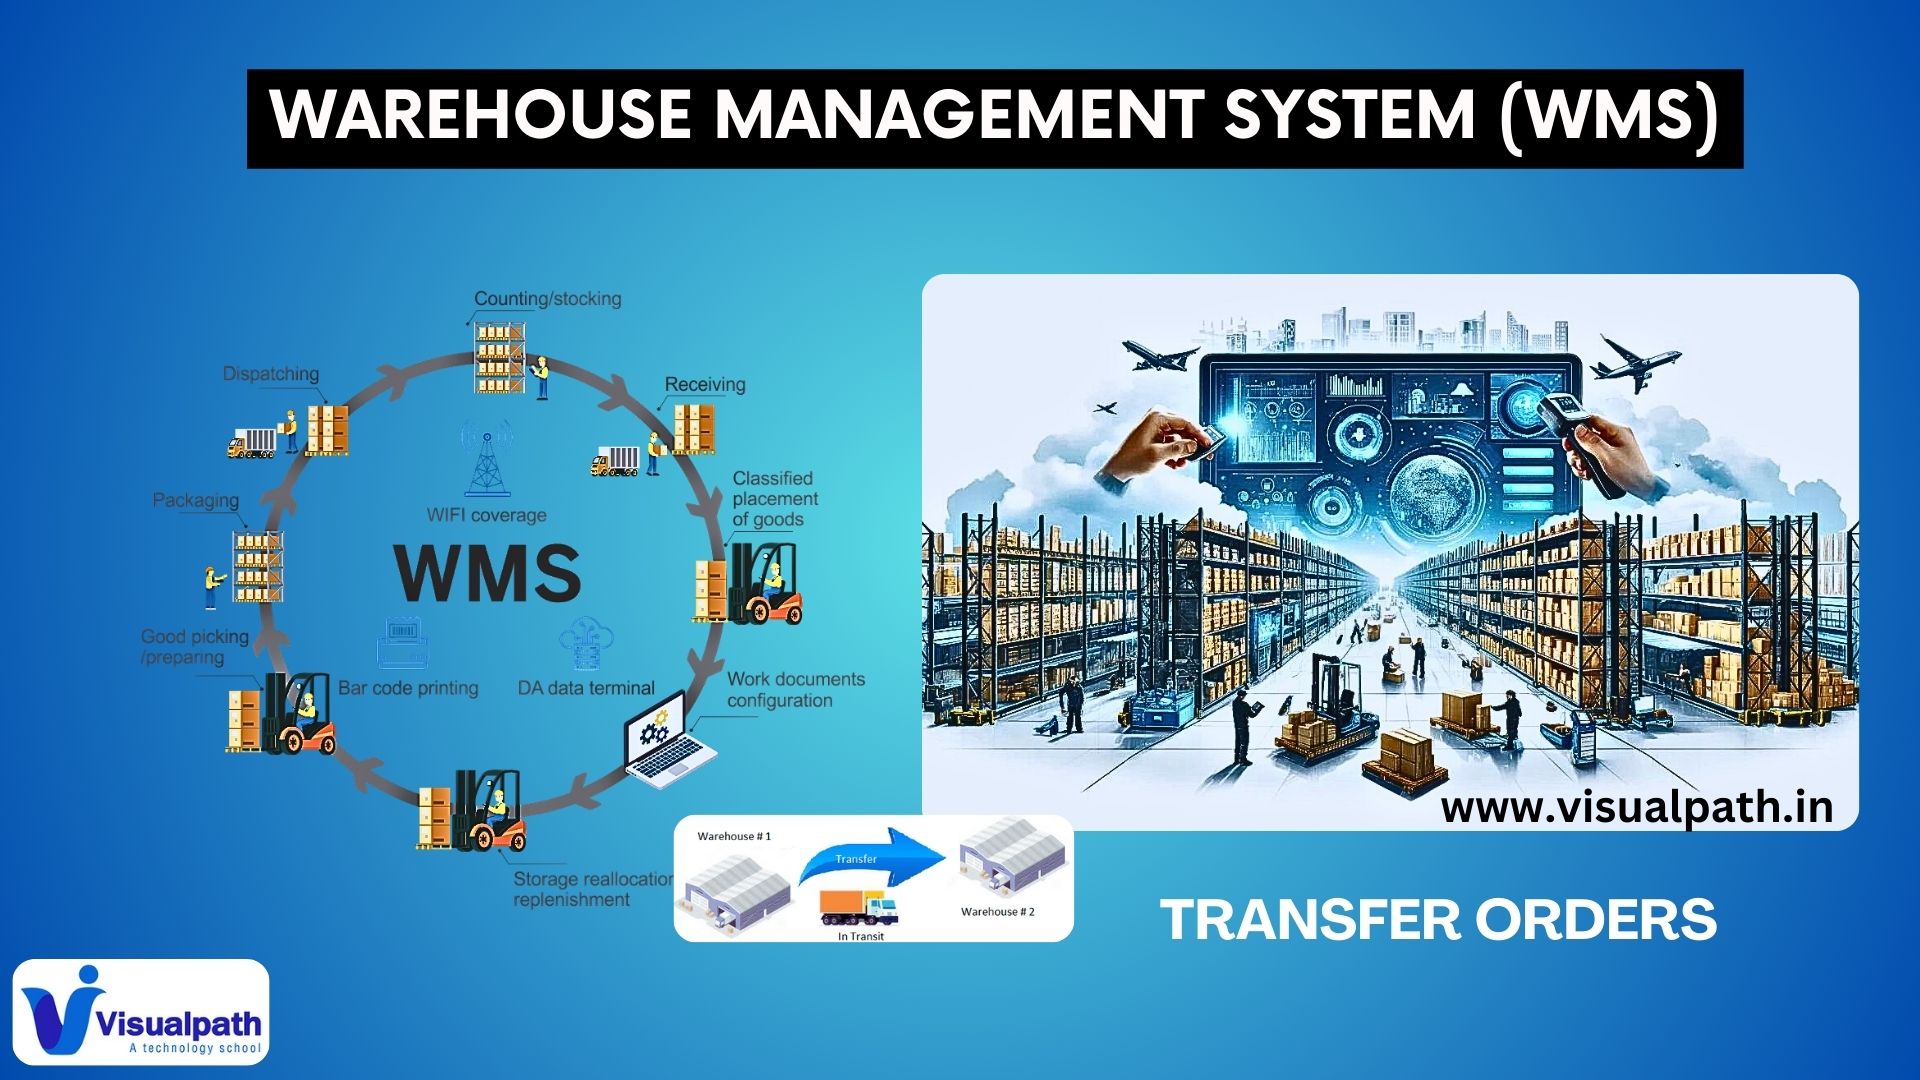 What is a Transfer Order in The Warehouse Management System (WMS)?